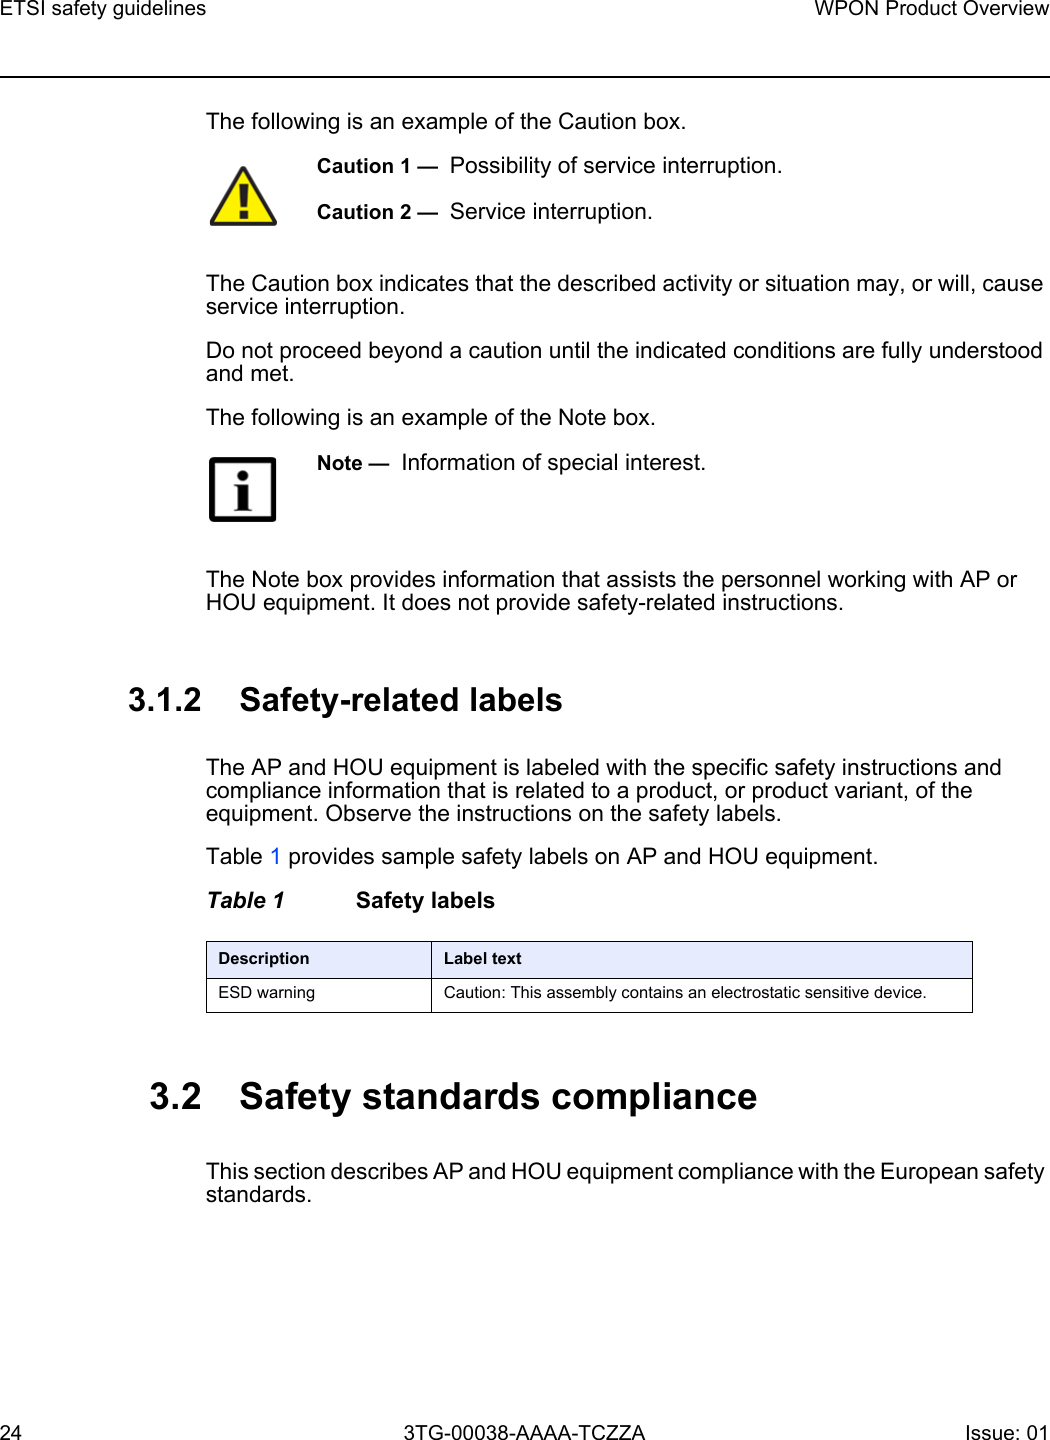 ETSI safety guidelines24WPON Product Overview3TG-00038-AAAA-TCZZA Issue: 01 The following is an example of the Caution box.The Caution box indicates that the described activity or situation may, or will, cause service interruption.Do not proceed beyond a caution until the indicated conditions are fully understood and met.The following is an example of the Note box.The Note box provides information that assists the personnel working with AP or HOU equipment. It does not provide safety-related instructions.3.1.2 Safety-related labelsThe AP and HOU equipment is labeled with the specific safety instructions and compliance information that is related to a product, or product variant, of the equipment. Observe the instructions on the safety labels.Table 1 provides sample safety labels on AP and HOU equipment.Table 1 Safety labels3.2 Safety standards complianceThis section describes AP and HOU equipment compliance with the European safety standards.Caution 1 —  Possibility of service interruption.Caution 2 —  Service interruption.Note —  Information of special interest.Description Label textESD warning Caution: This assembly contains an electrostatic sensitive device.